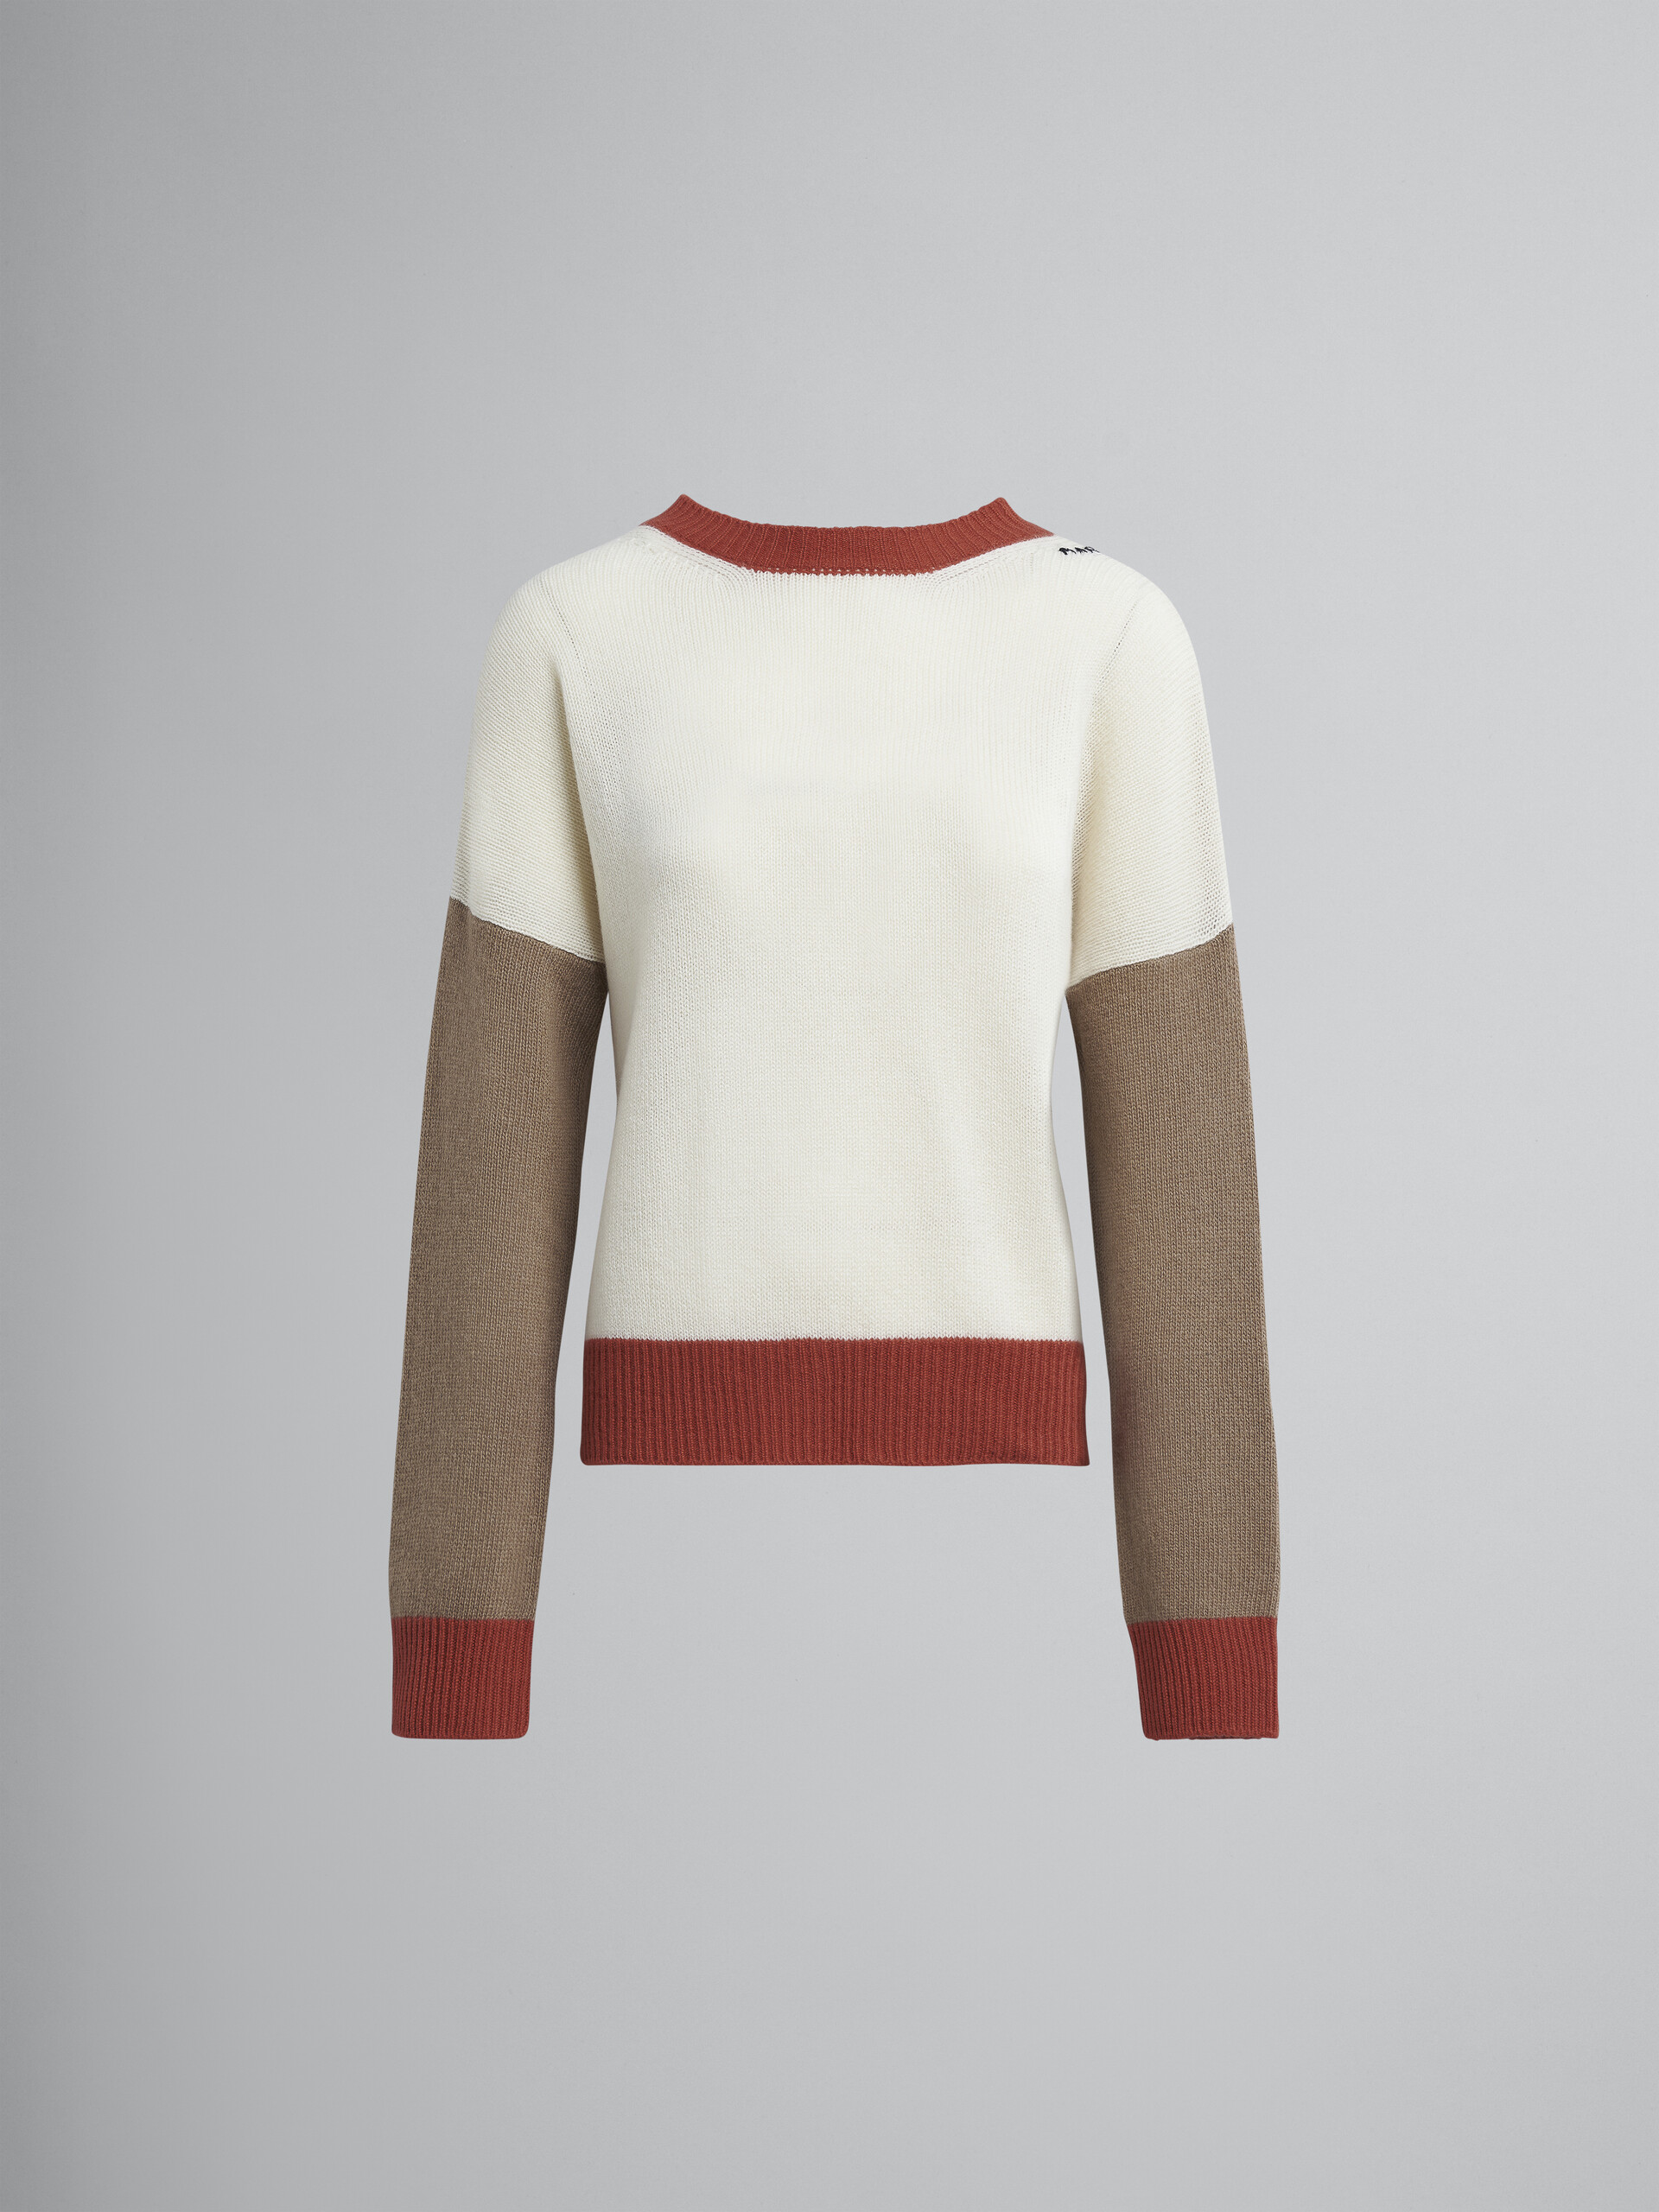 Iconic cashmere sweater - Pullovers - Image 1